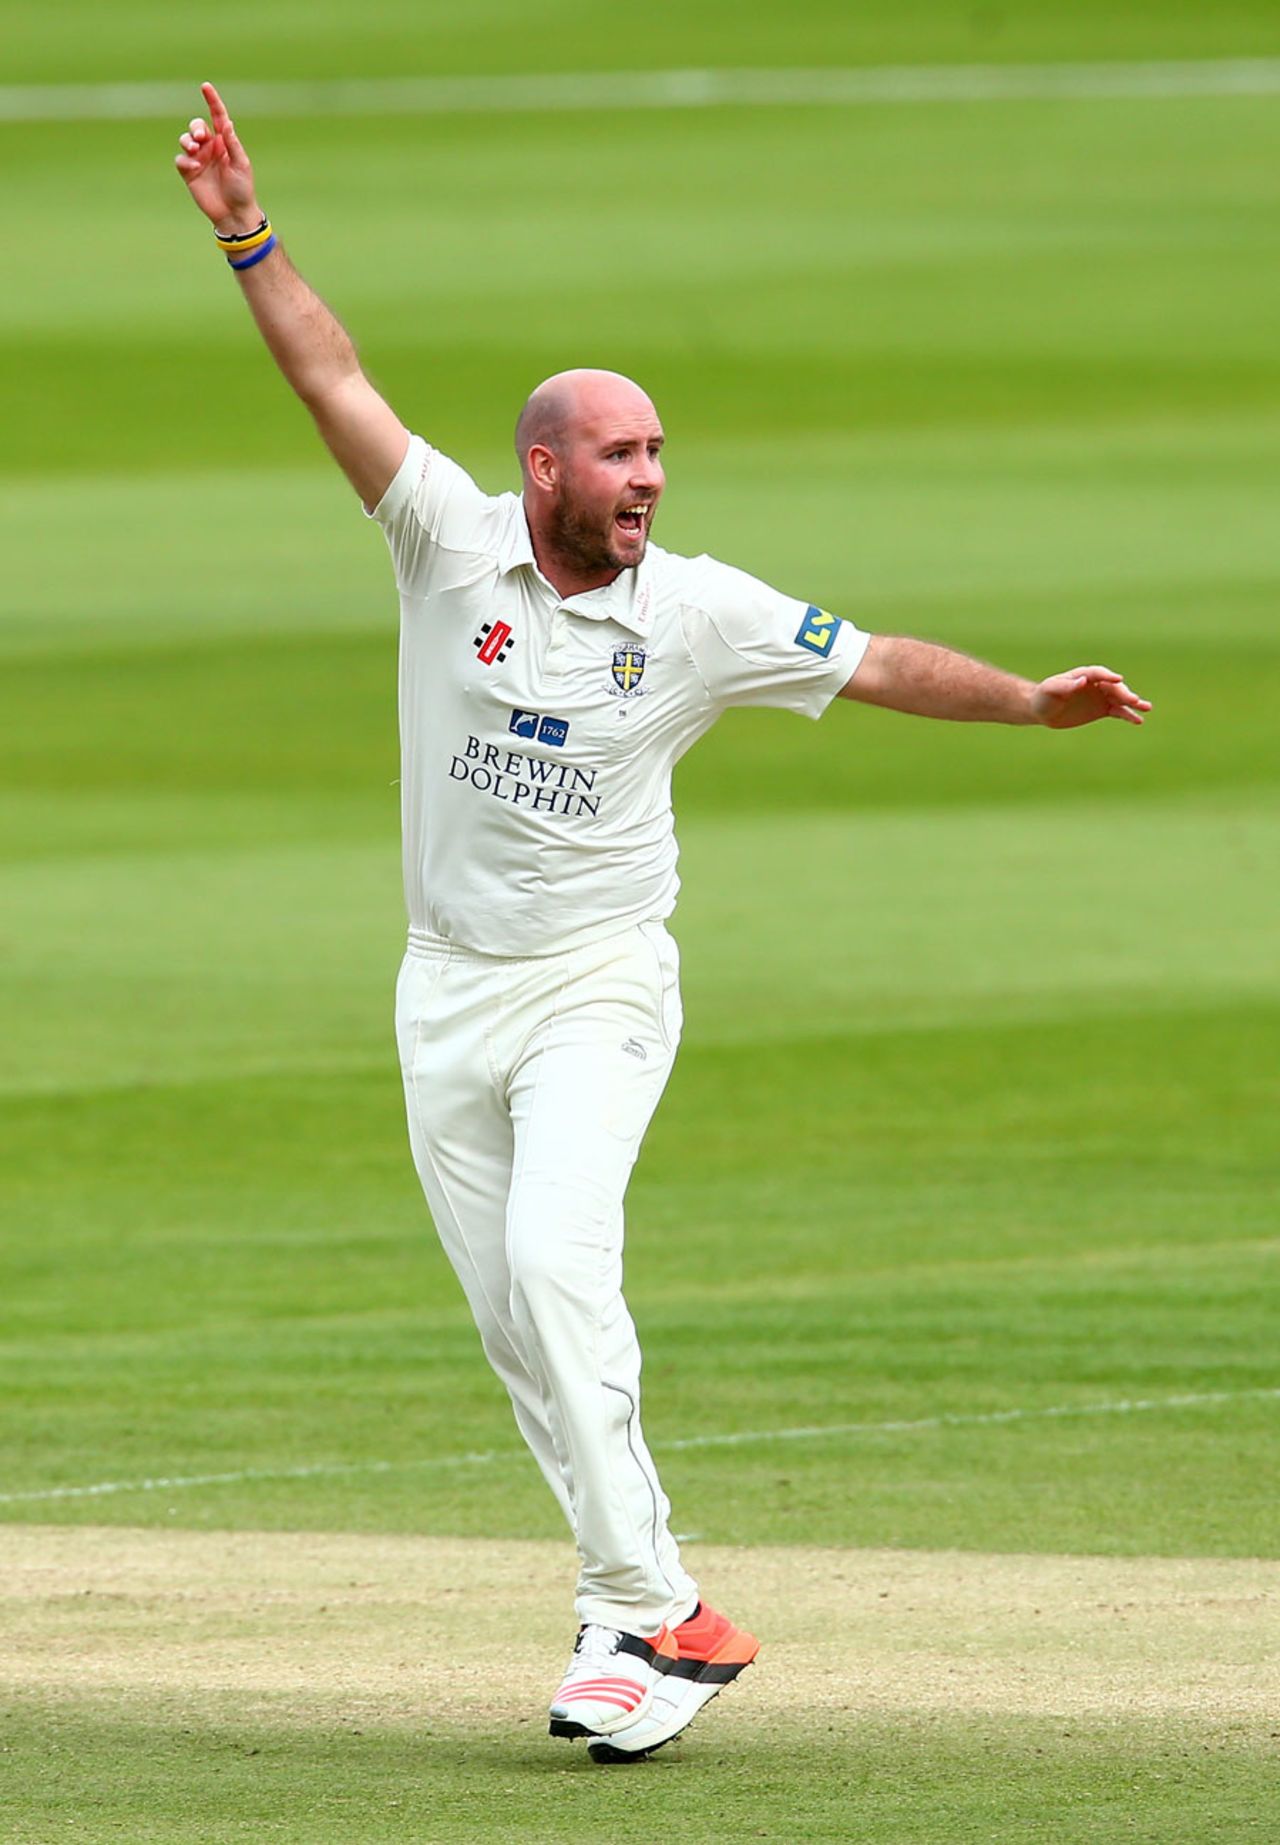 Chris Rushworth took a second-innings five-for, Middlesex v Durham, County Championship Division One, Lord's, 3rd day, May 4, 2015